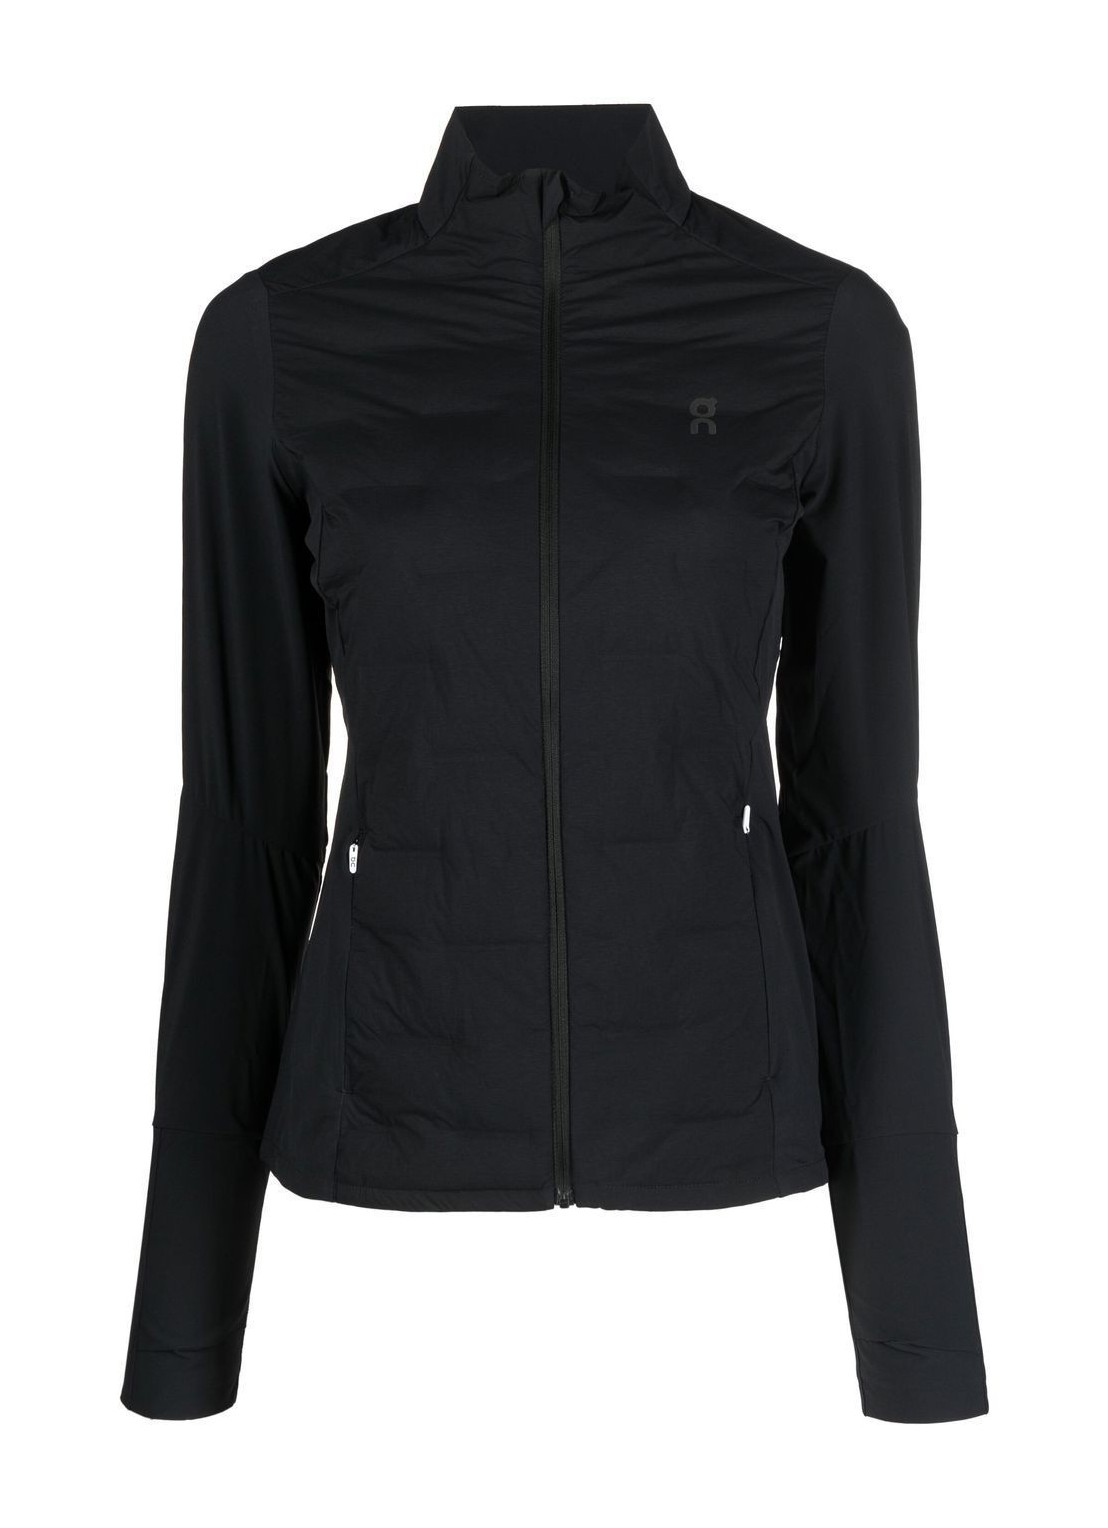 Outerwear on running outerwear woman climate jacket 26400708 black talla L
 